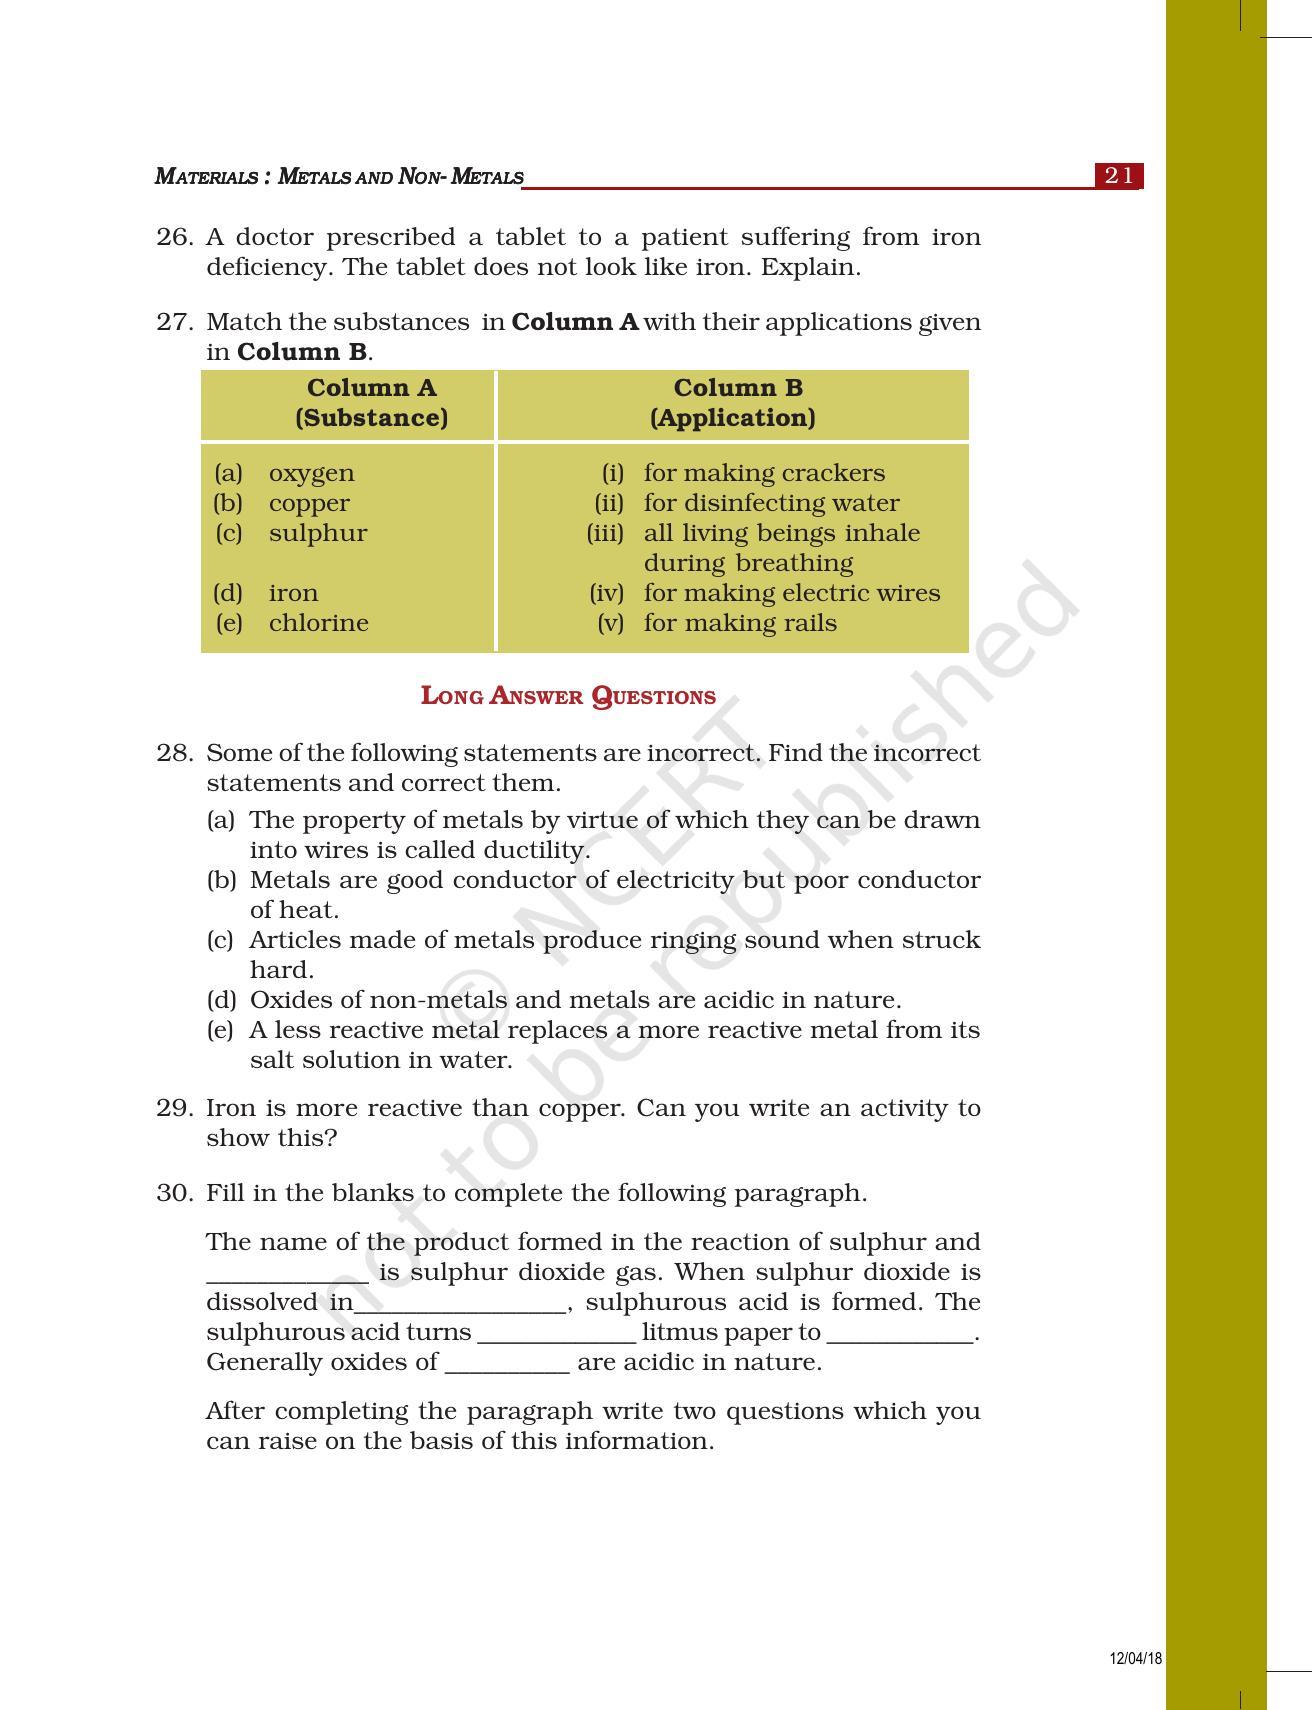 NCERT Exemplar Book for Class 8 Science: Chapter 4- Materials : Metals and Non-Metals - Page 4